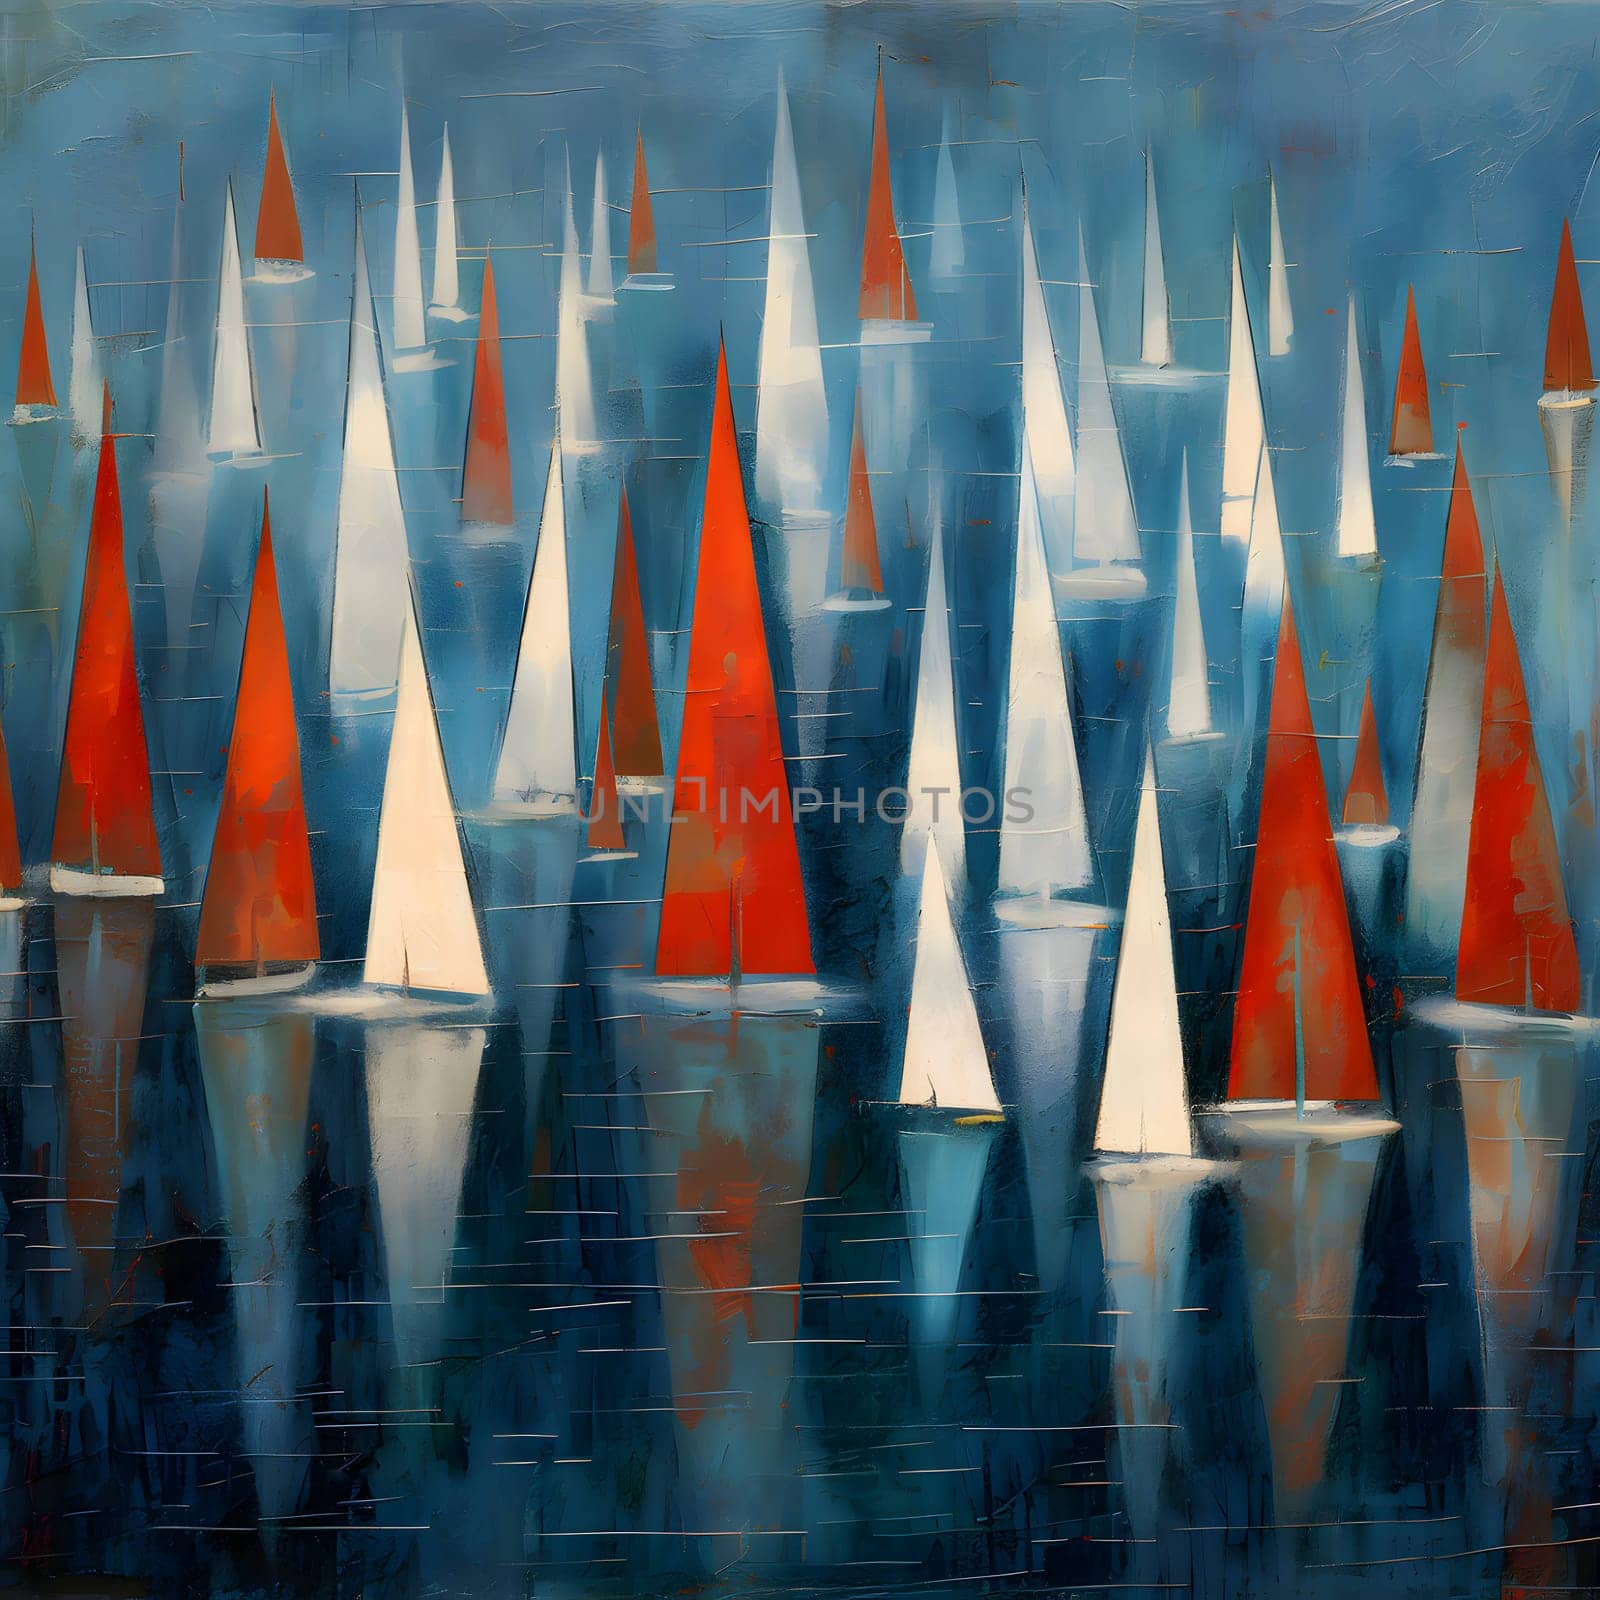 Abstract illustration: Abstract background with red, white and blue boats on the water.